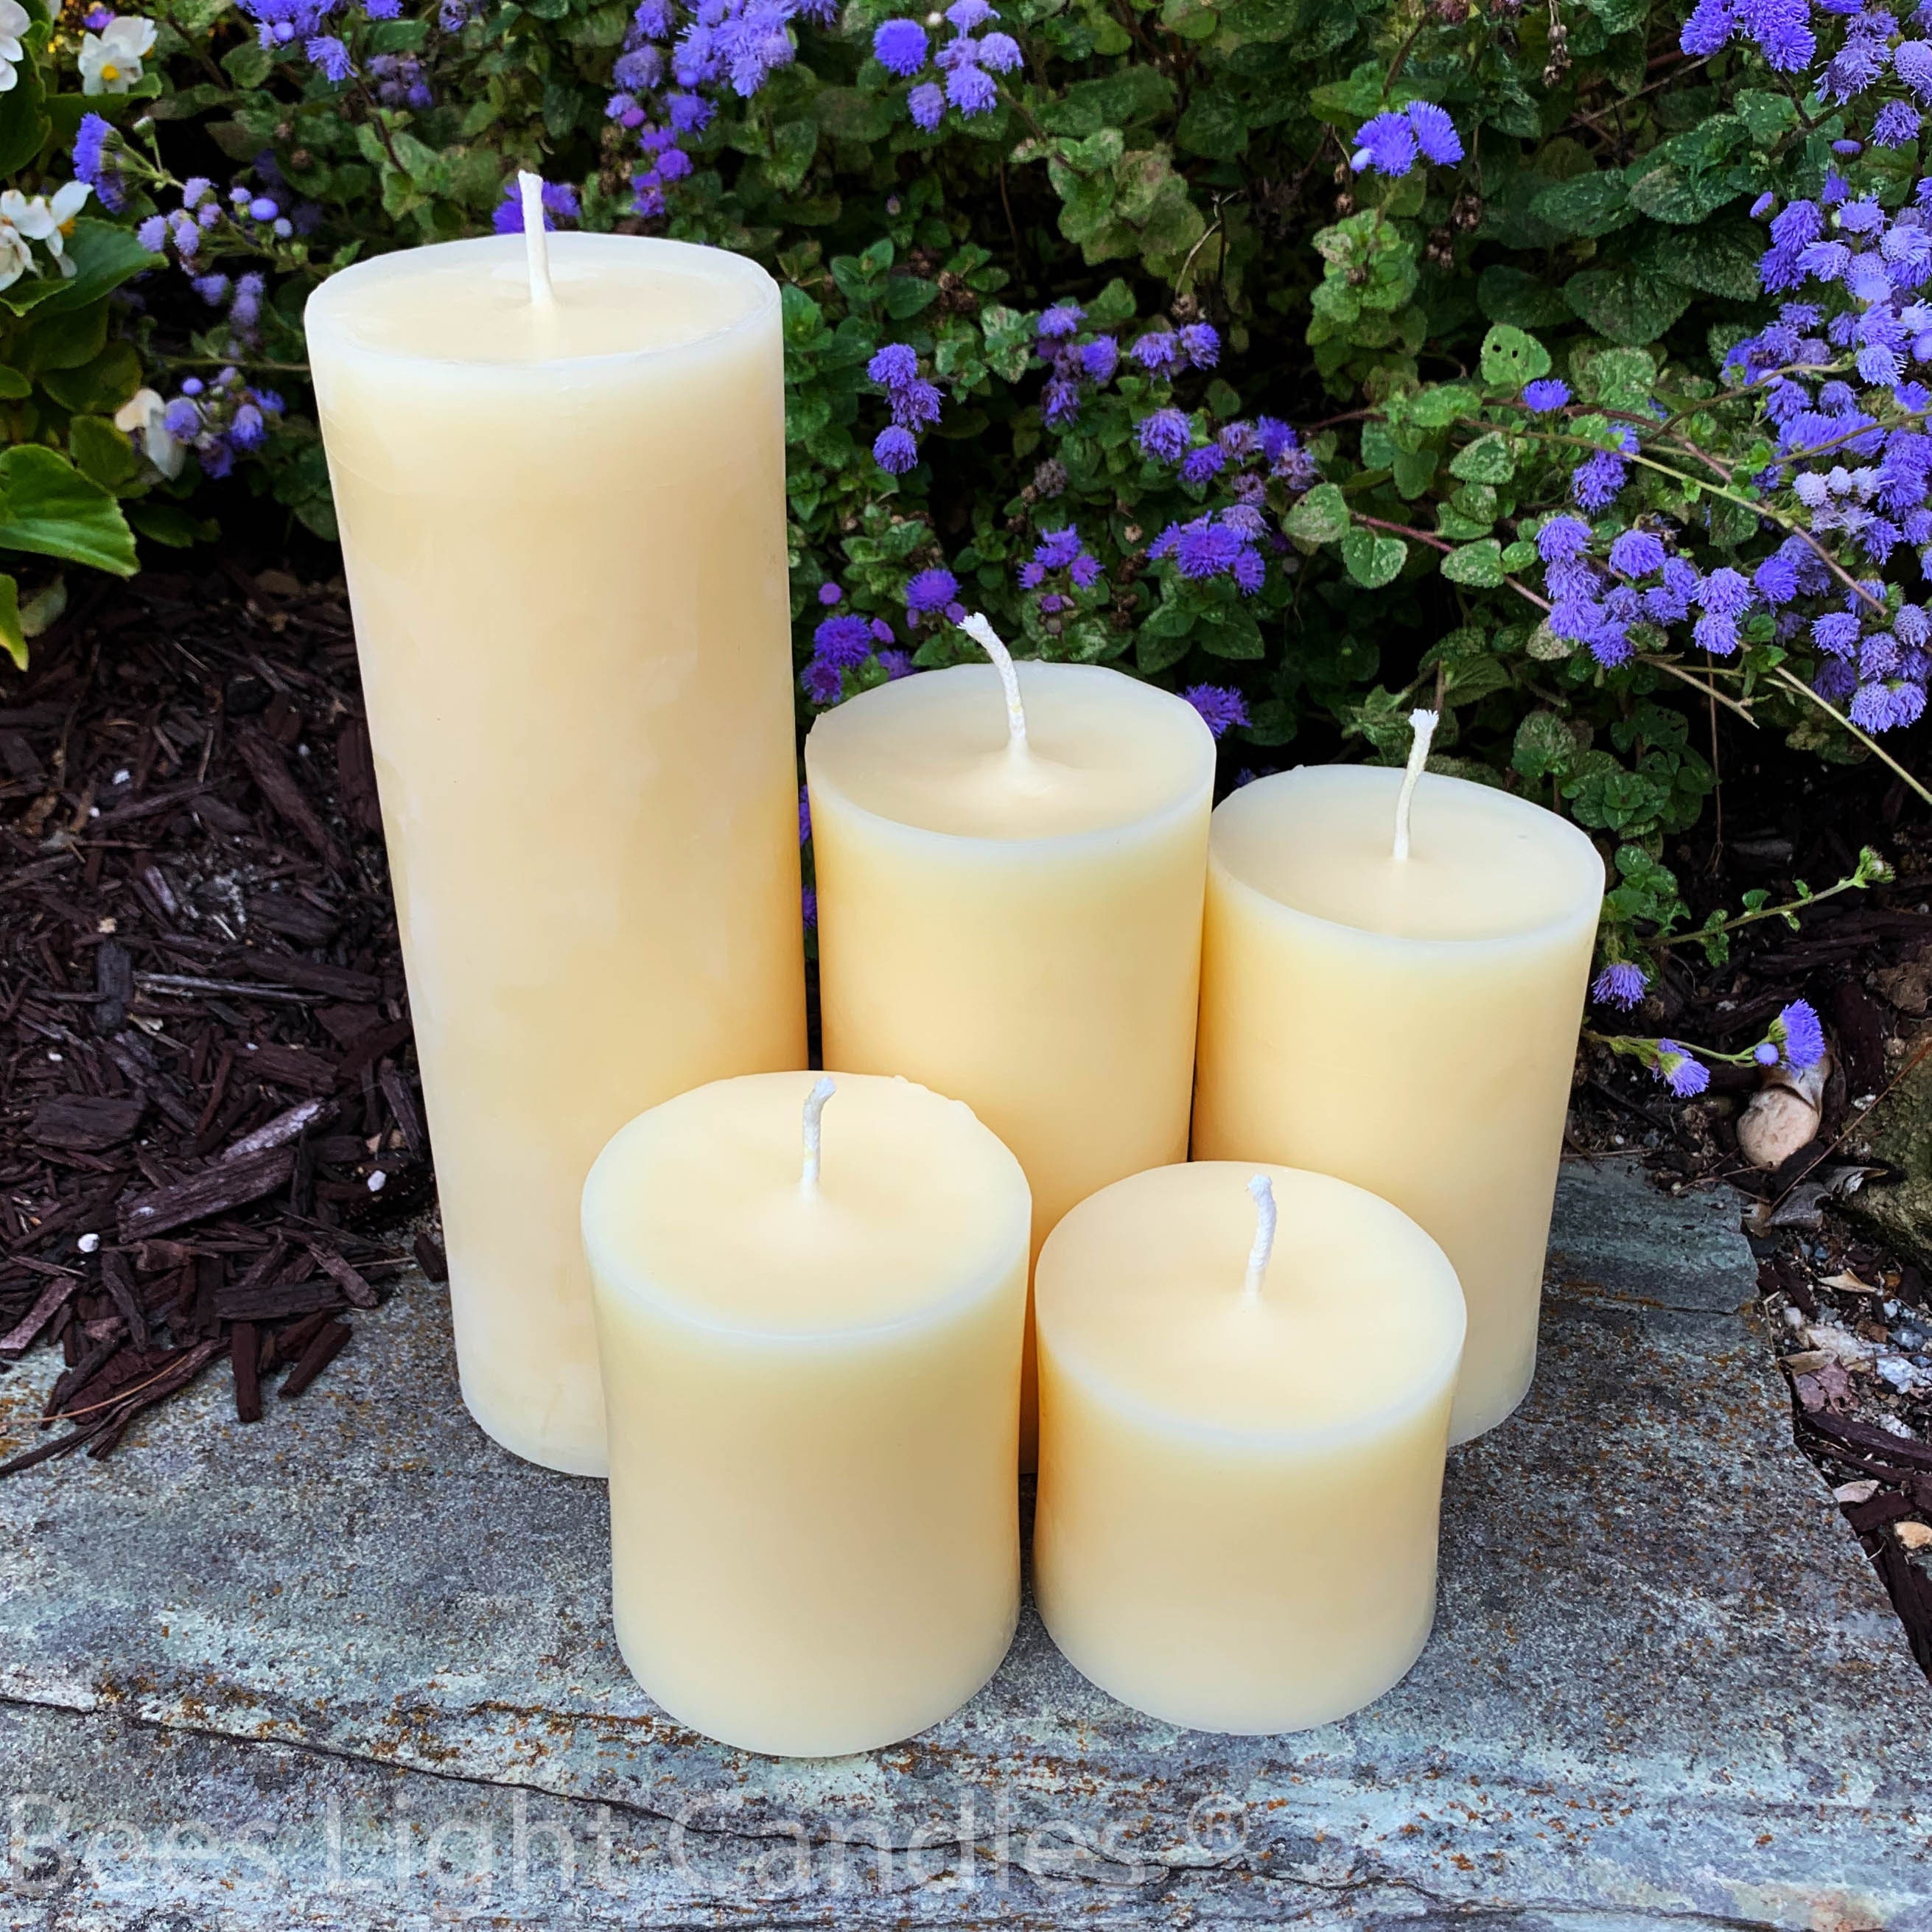  200 Tealight Beeswax Candles BULK 100% Natural Handcrafted in  USA/Aluminum Cup Tea Lights/Wedding/Event/Party/Holiday/Clean Burning  Emergency Candle/Unscented/Allergy Friendly/Natural Honey Aroma : Home &  Kitchen